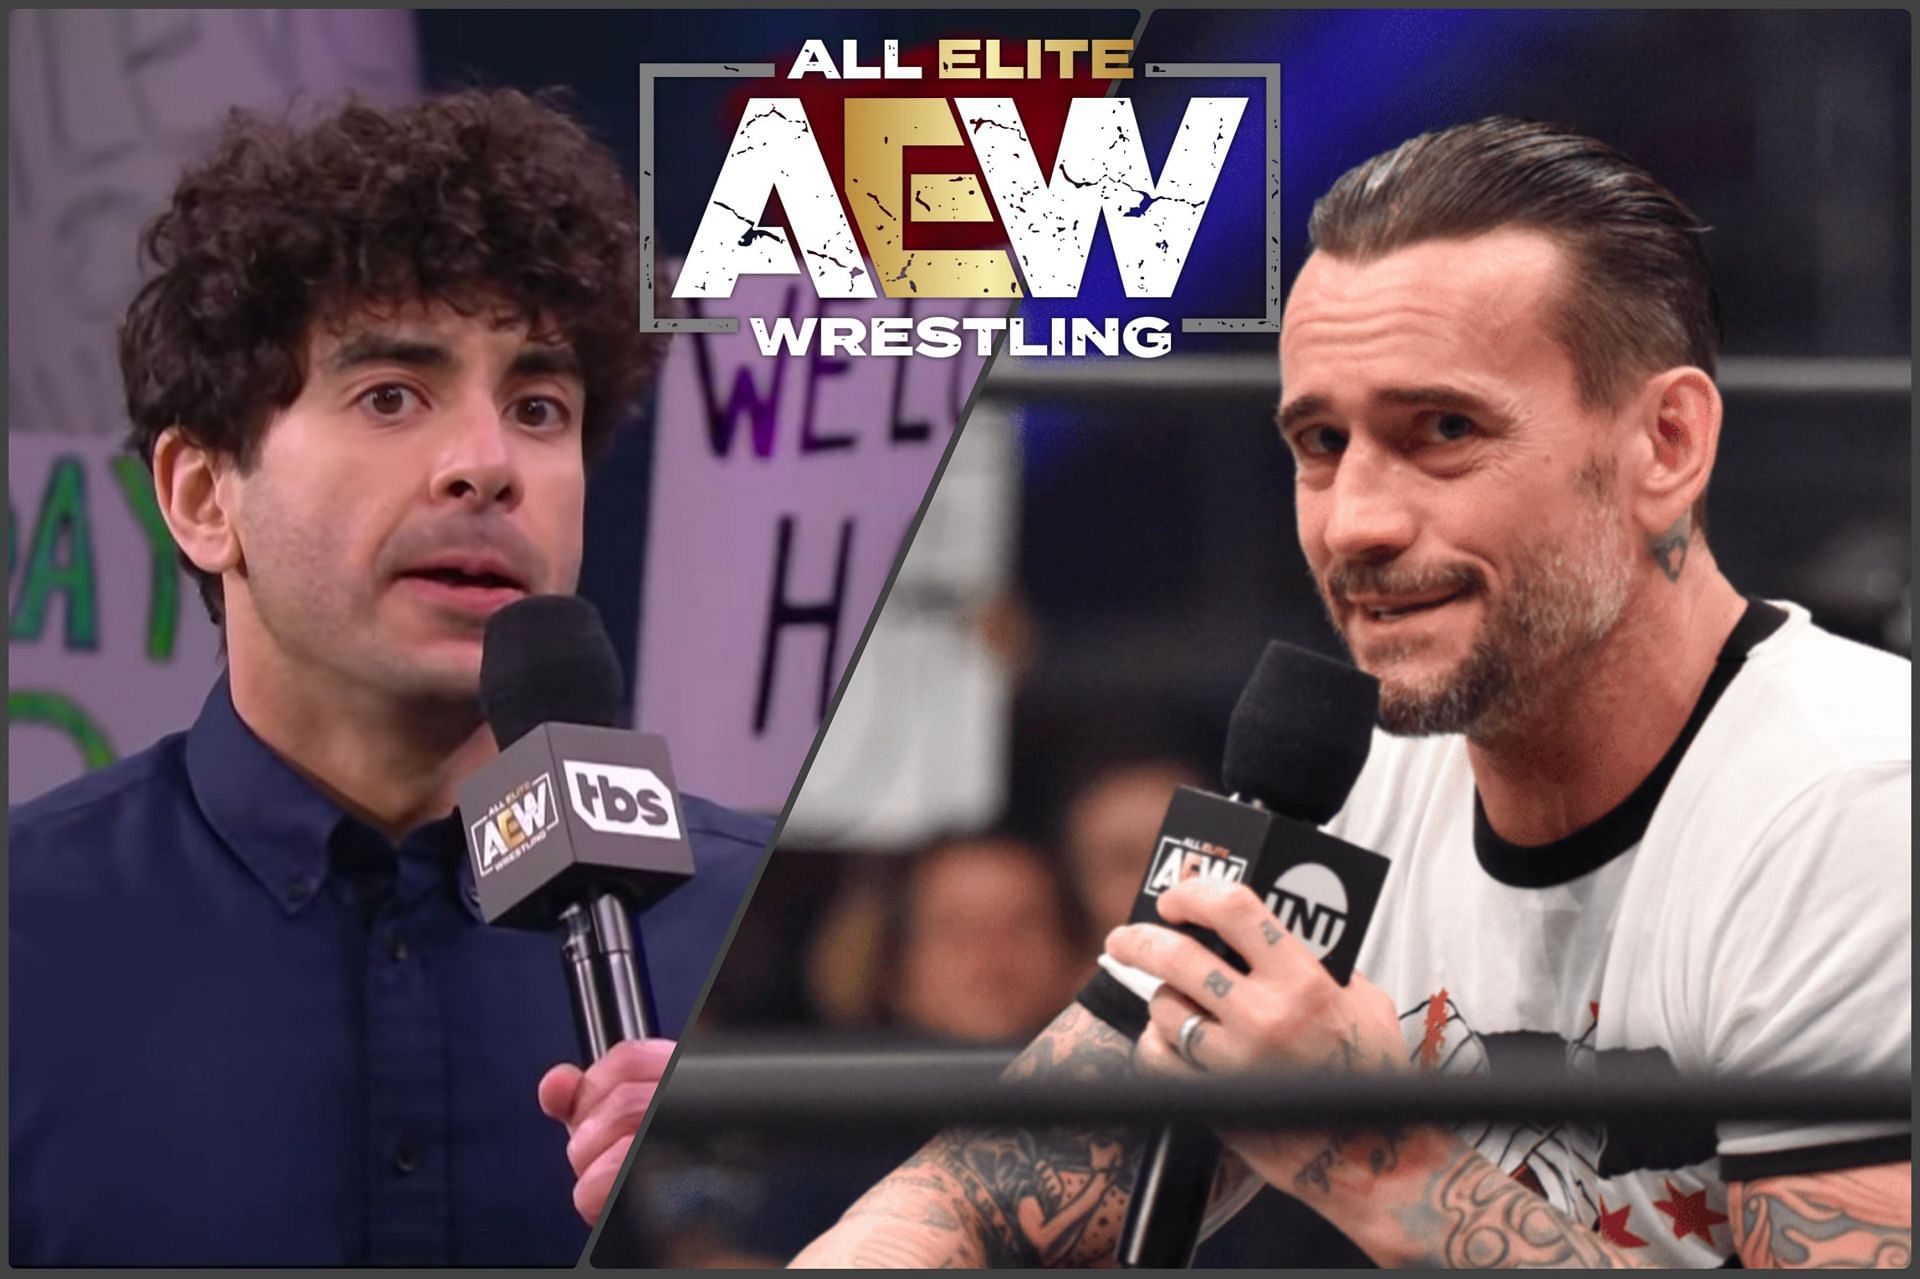 How is Tony Khan going to solve all the problems in AEW?